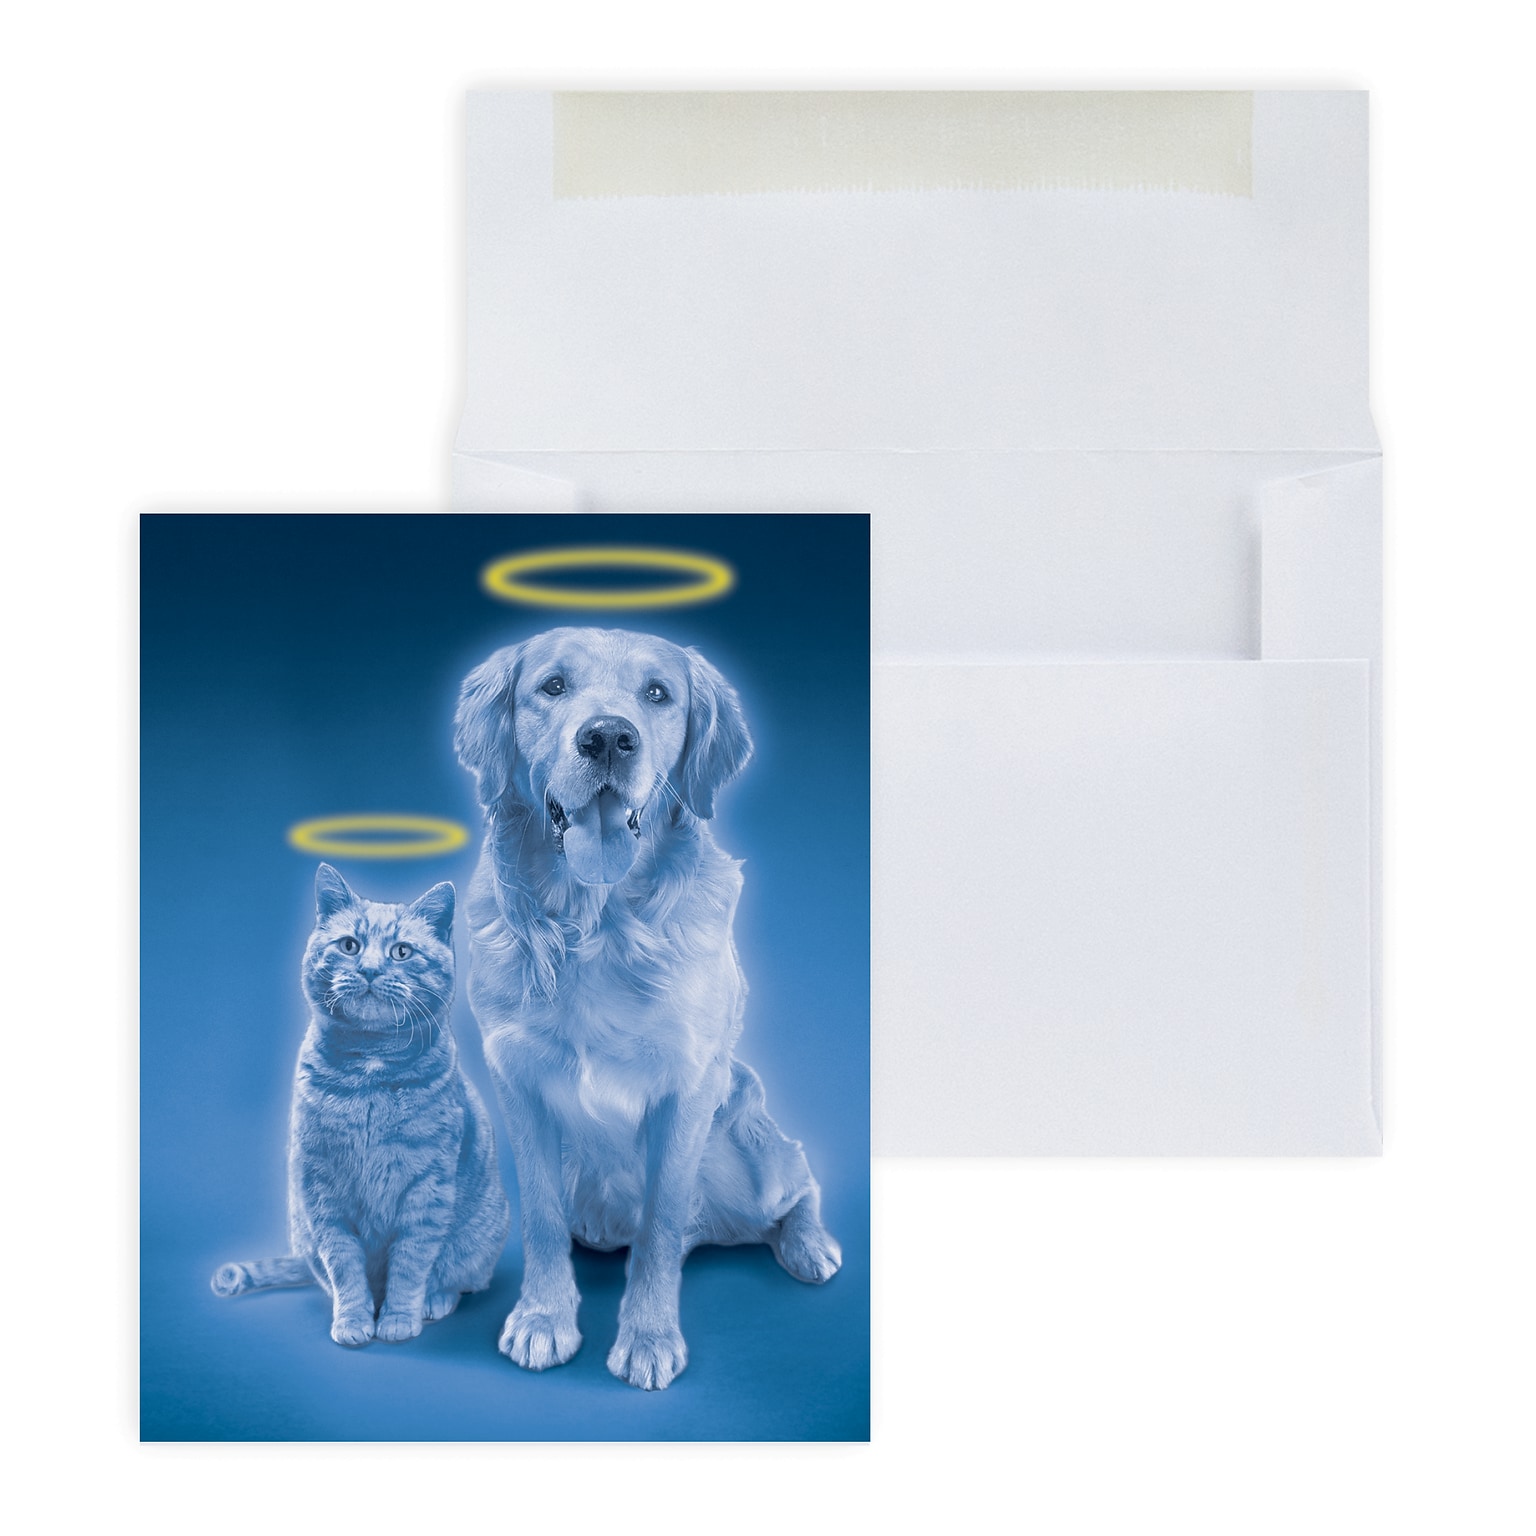 Custom Never Forget Good Friends Pet Sympathy Cards, With Envelopes, 4-1/4 x 5-3/8, 25 Cards per Set